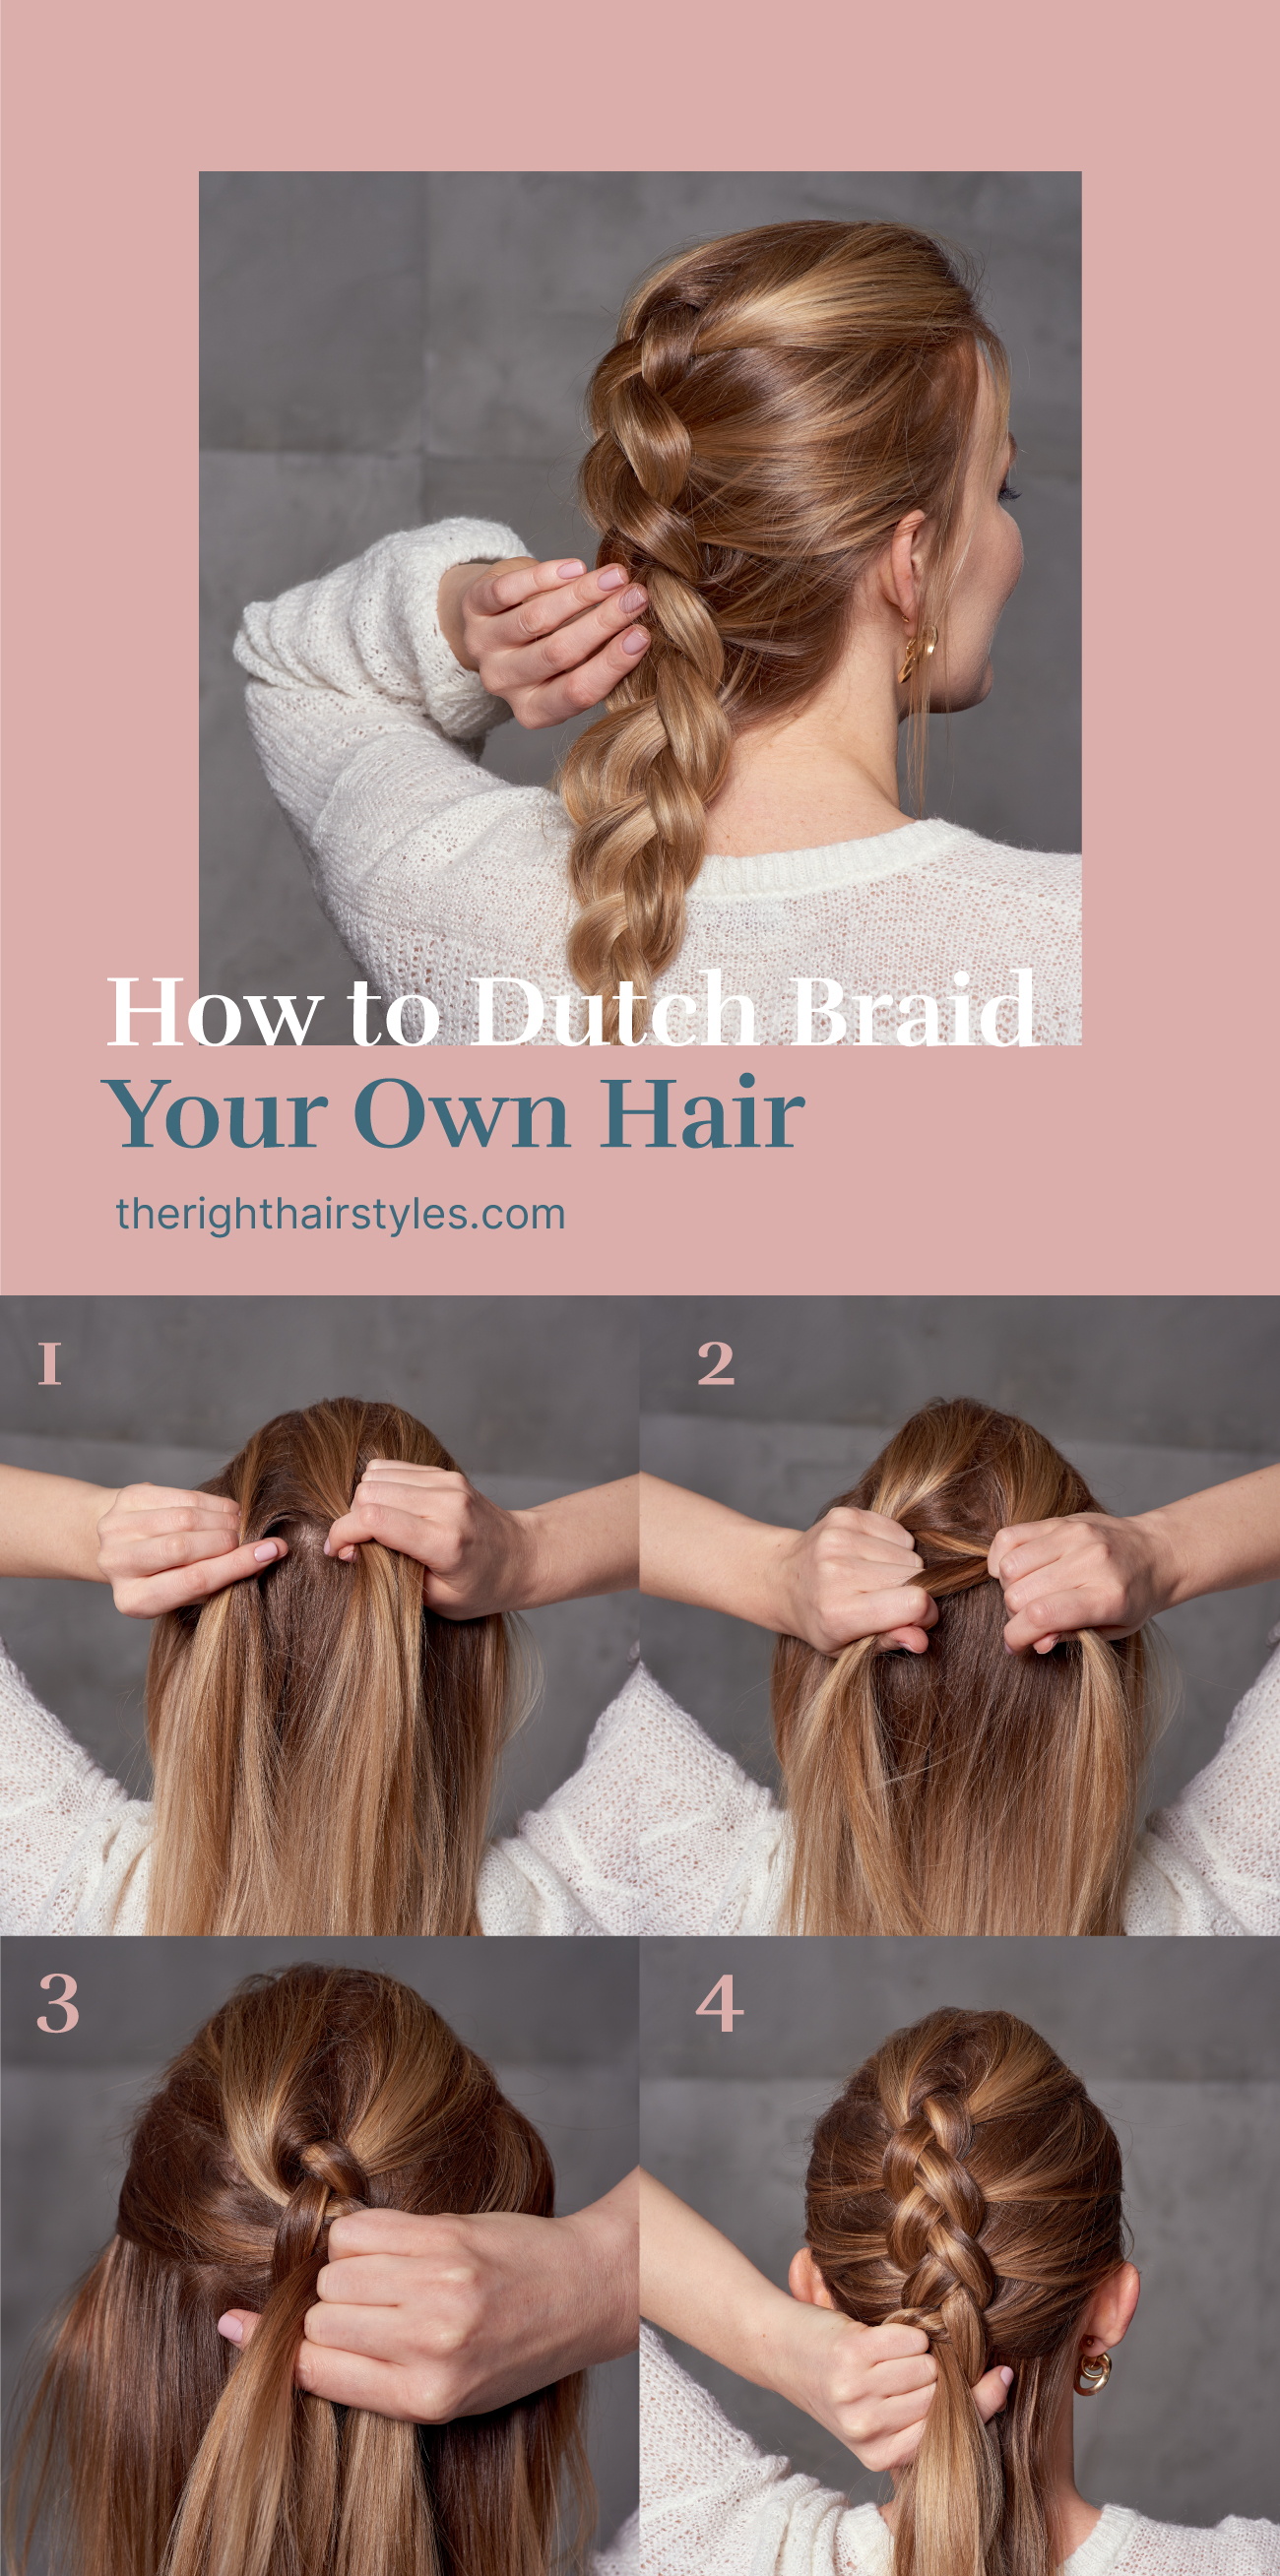 How to Dutch Braid Your Own Hair Step by Step Guide